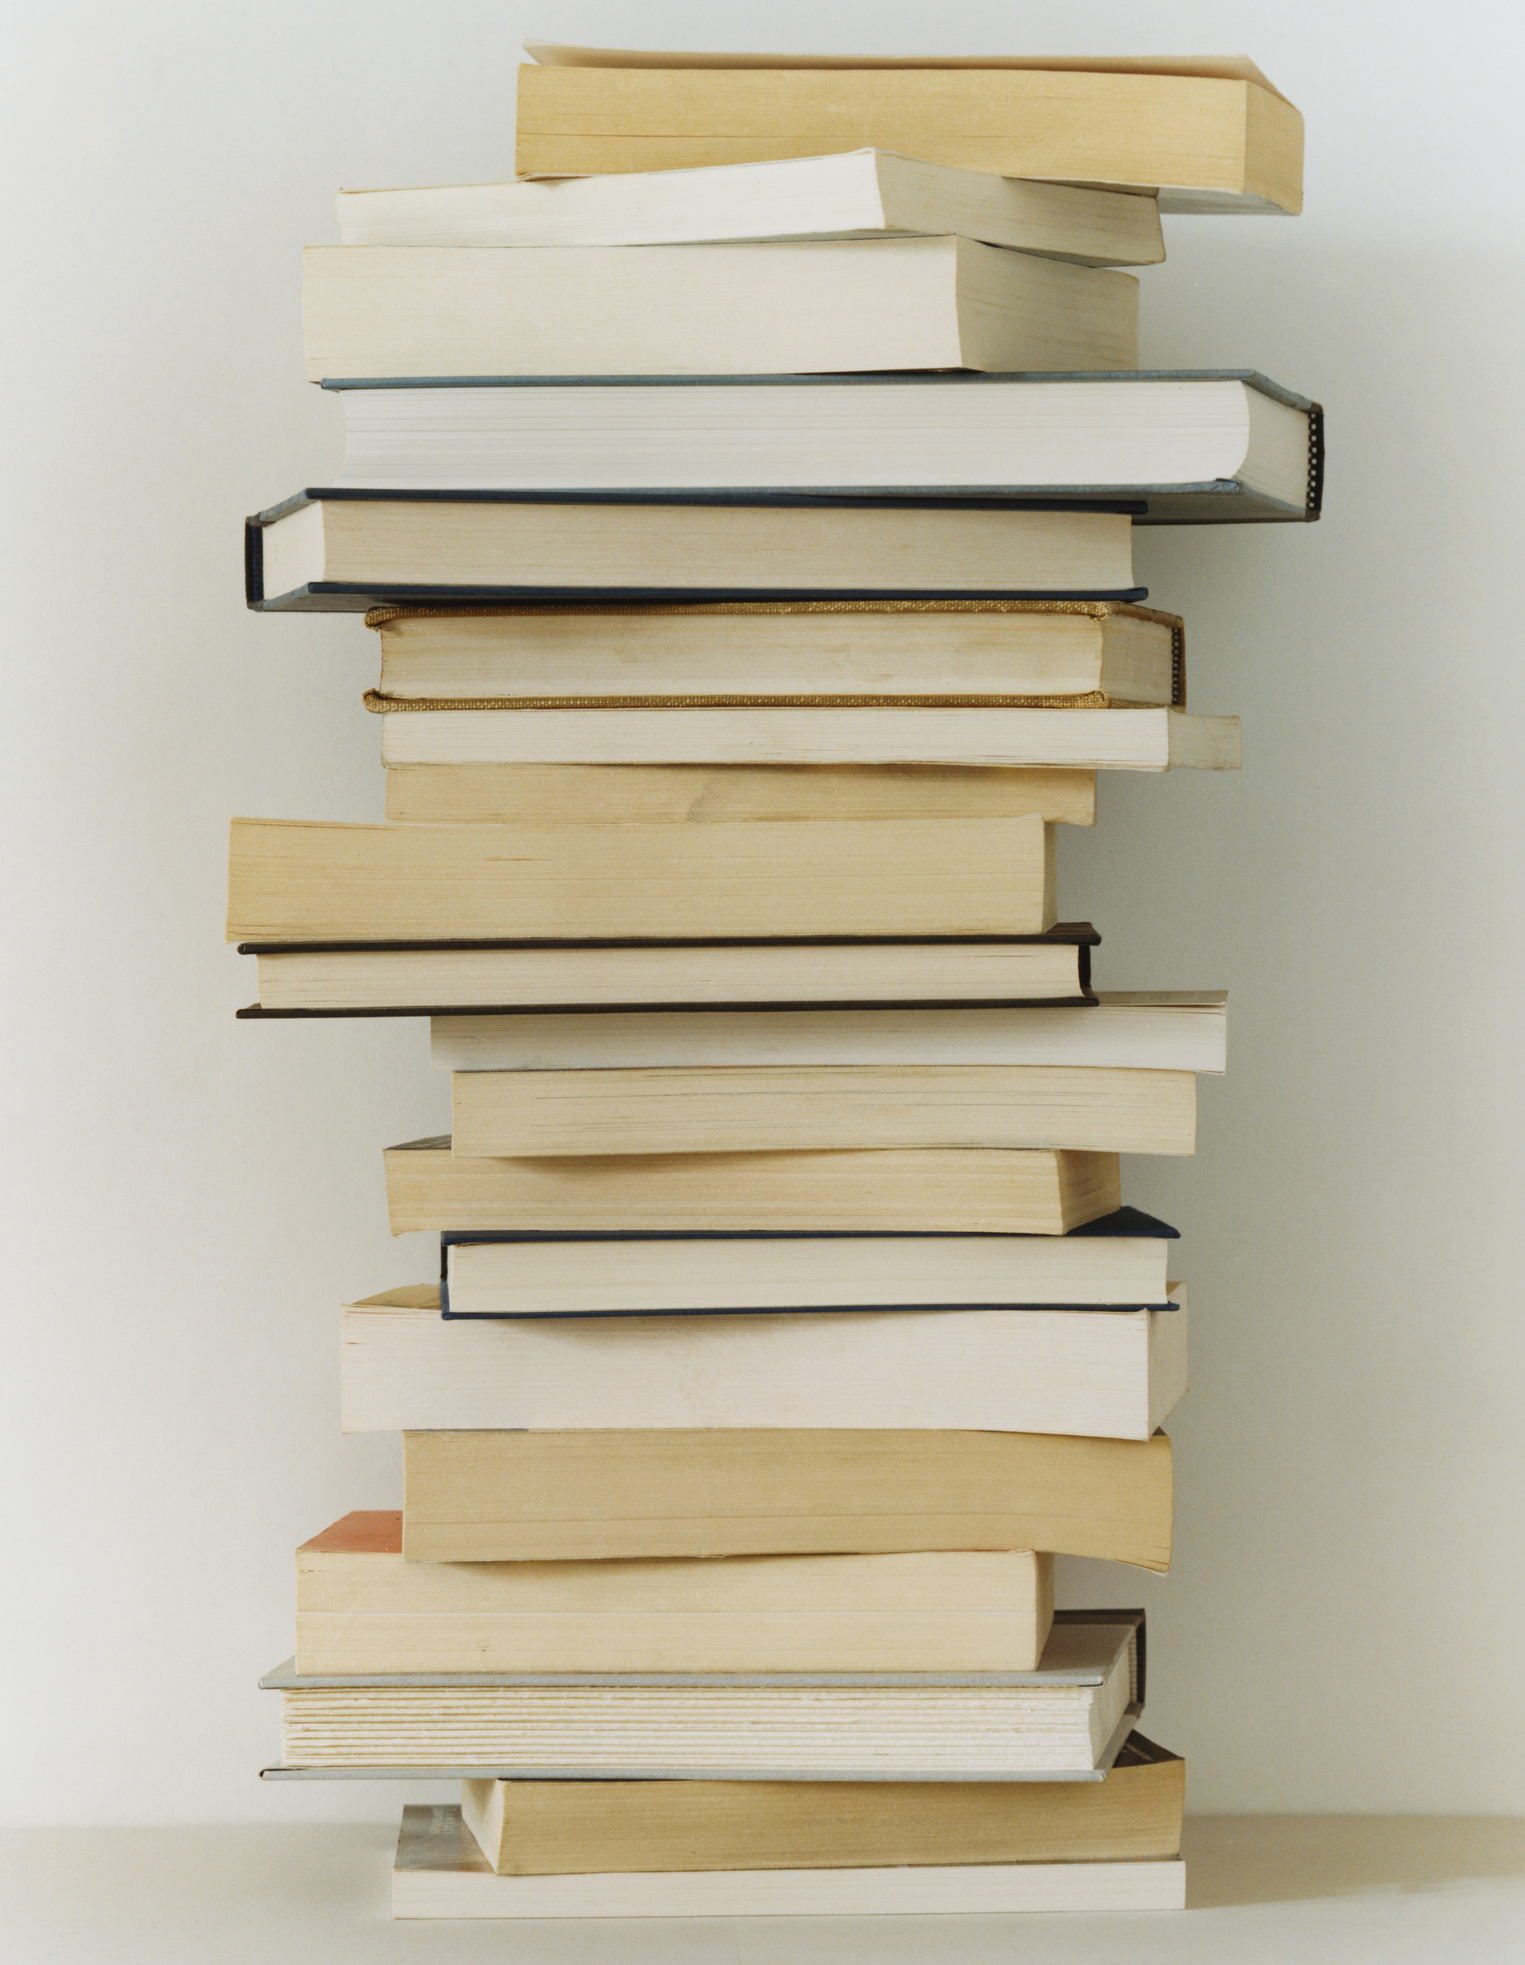 A tall stack of various hardcover and paperback books against a light background